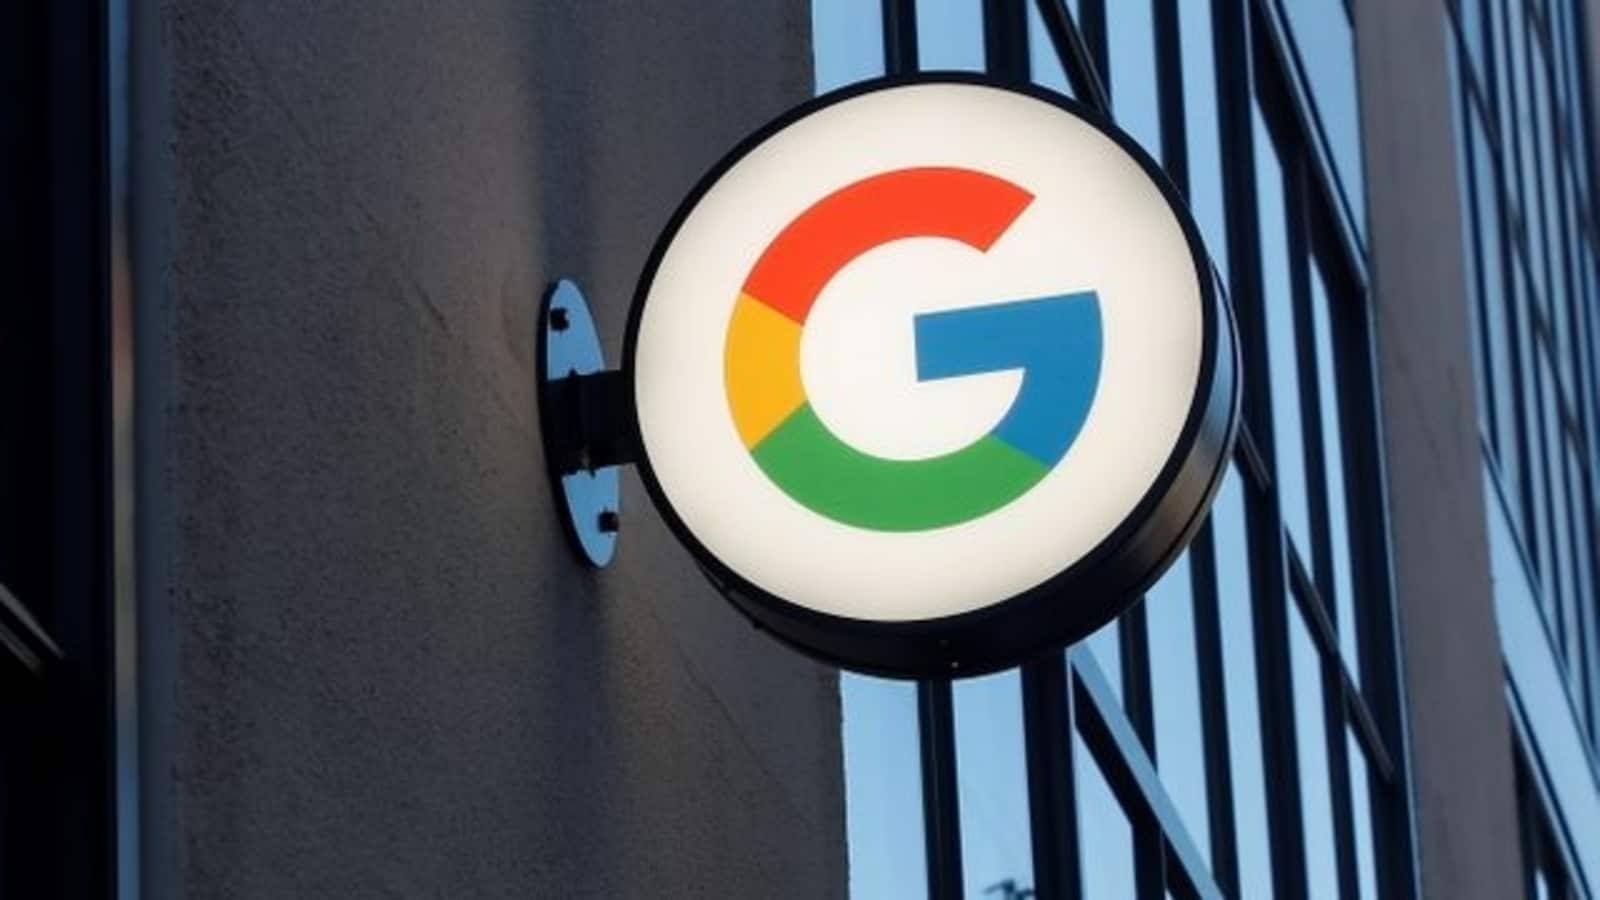 Google allows Bay Area employees to work from office, eases Covid-19 norms